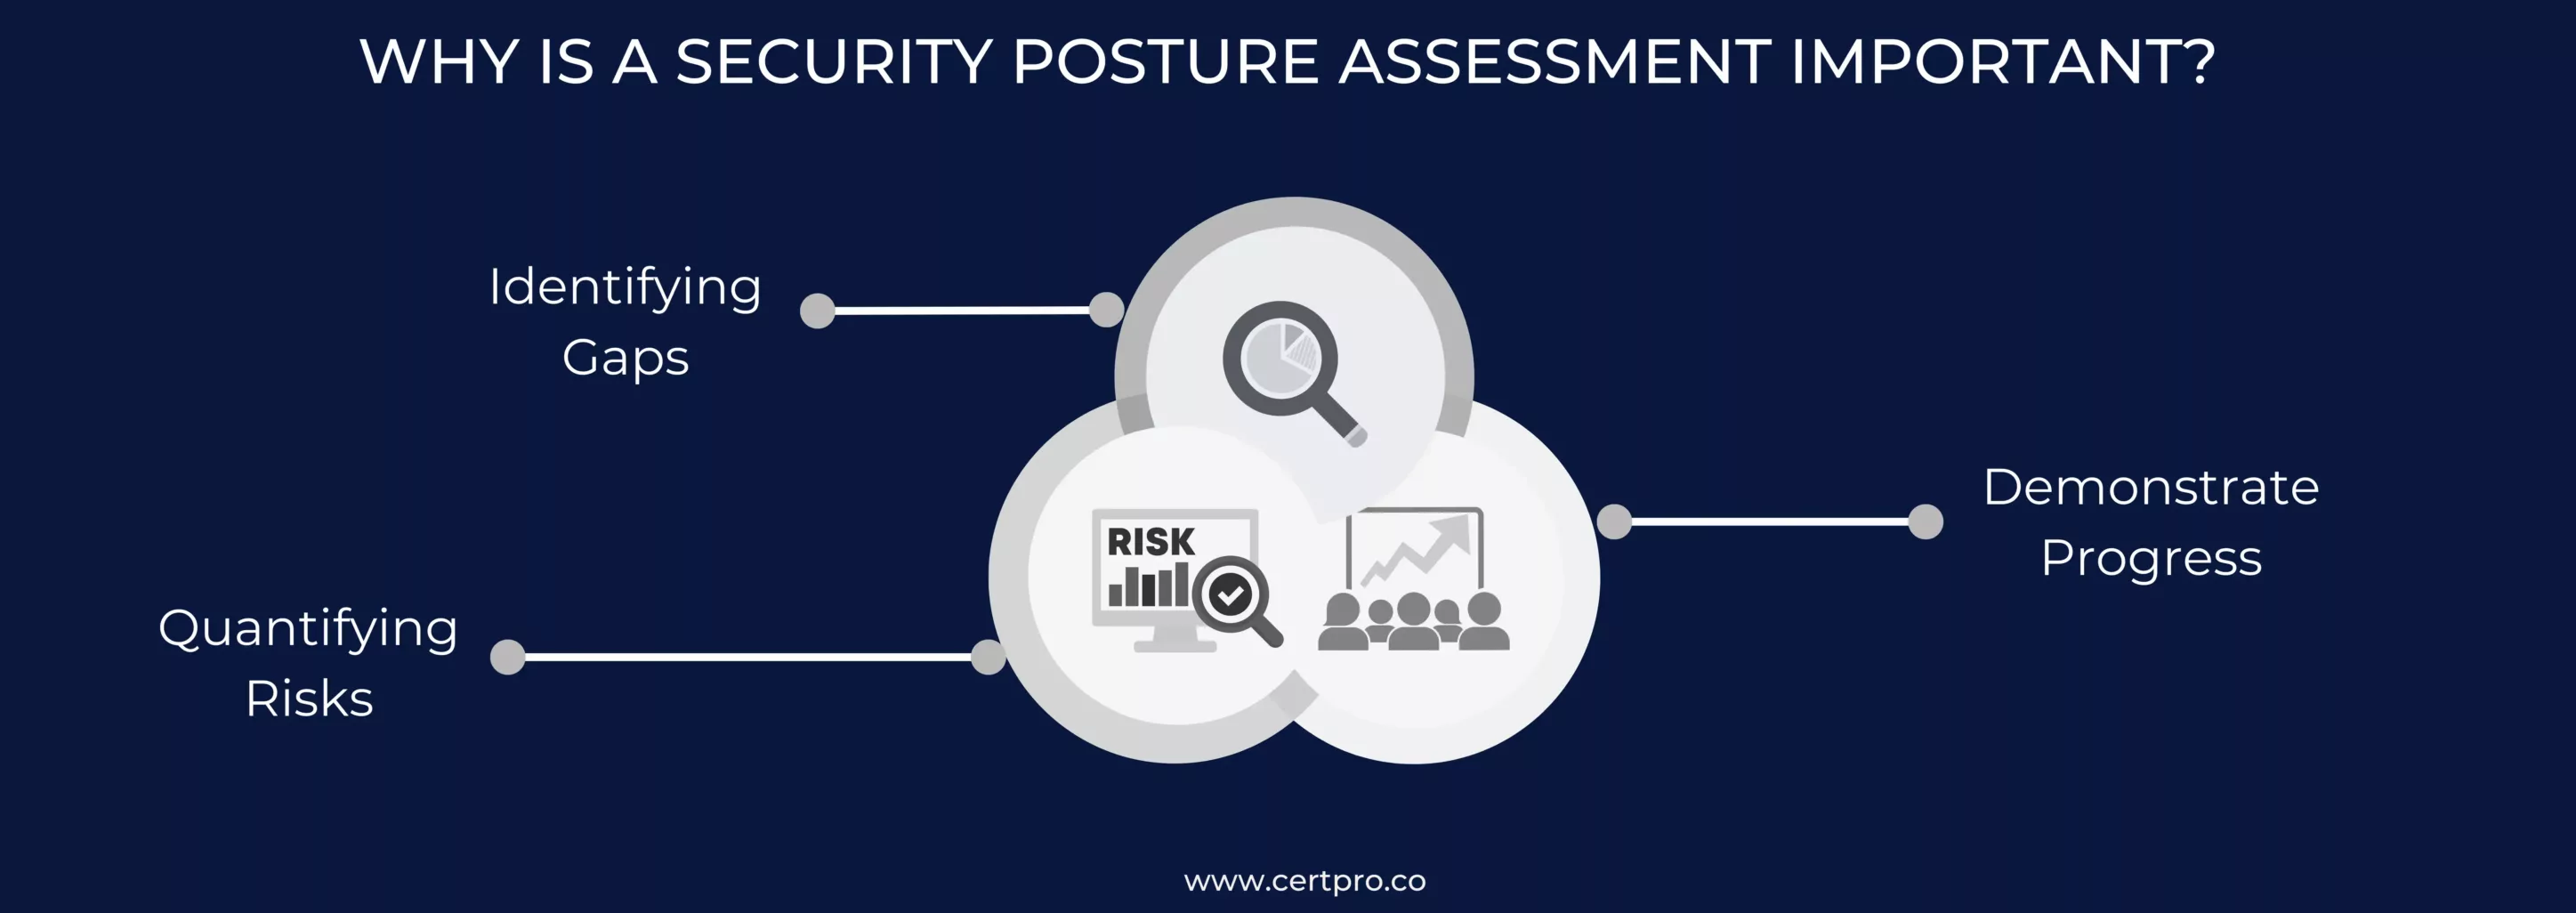 WHY IS A SECURITY POSTURE ASSESSMENT IMPORTANT